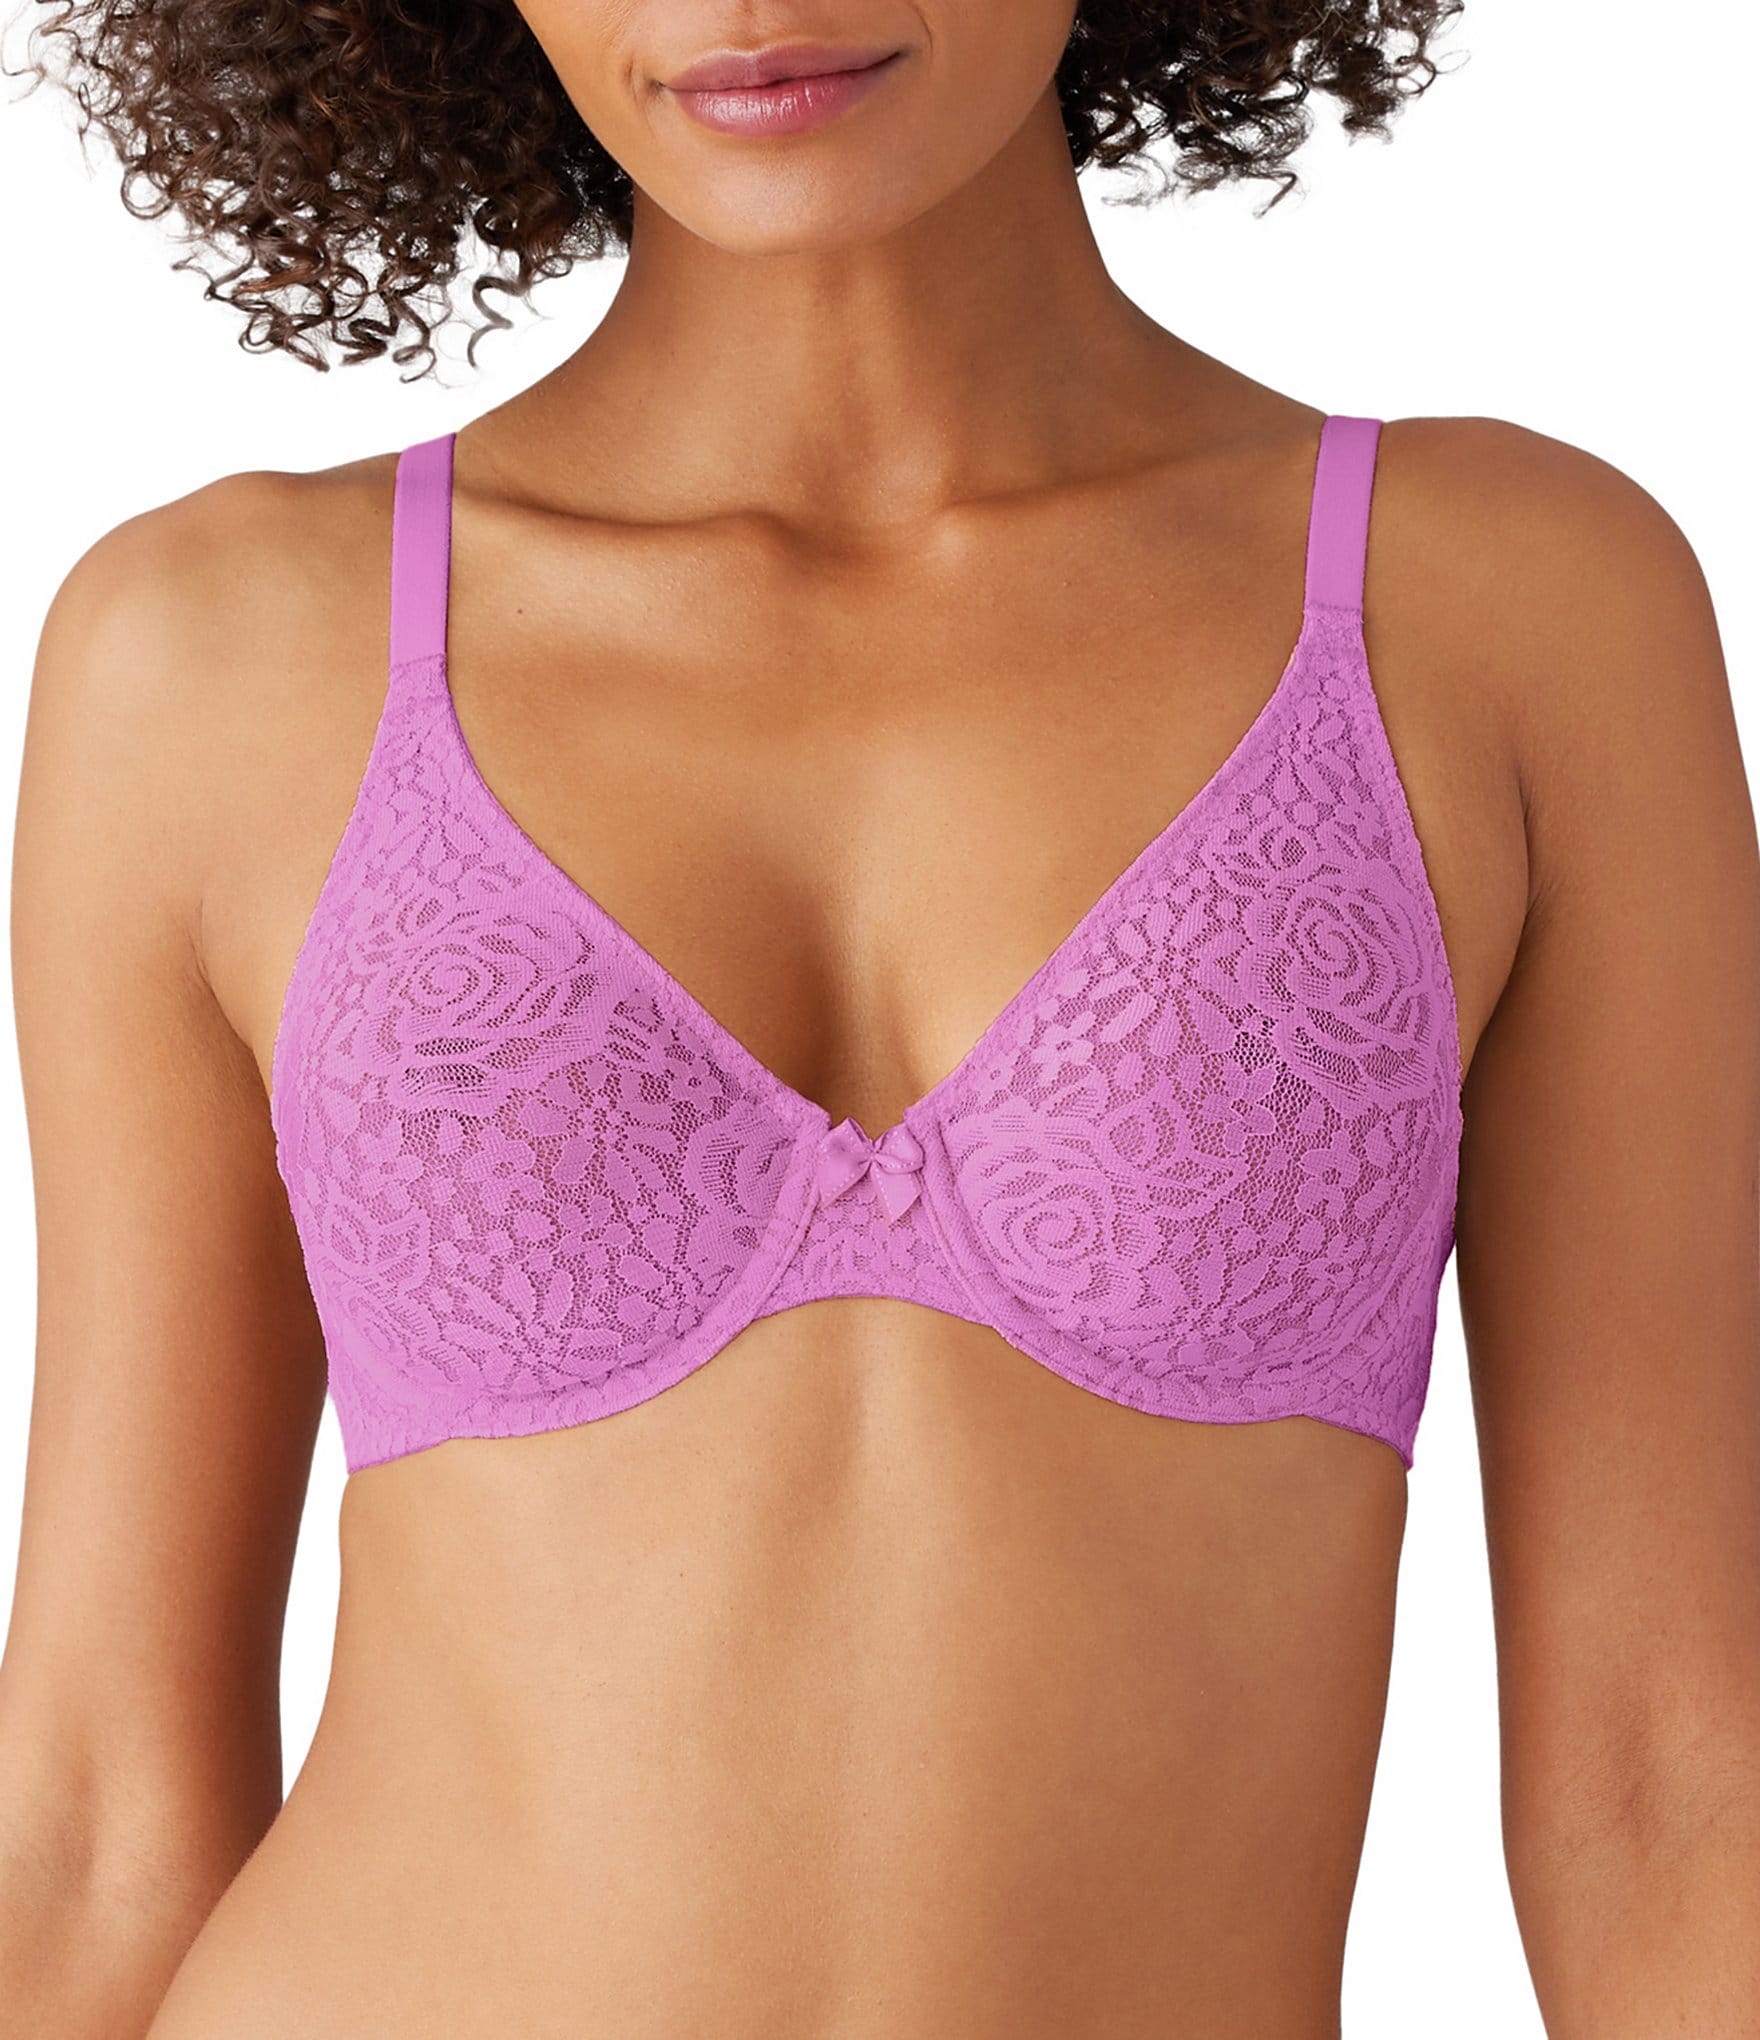 Sale & Clearance Bras: Push Ups, Lace & Strapless